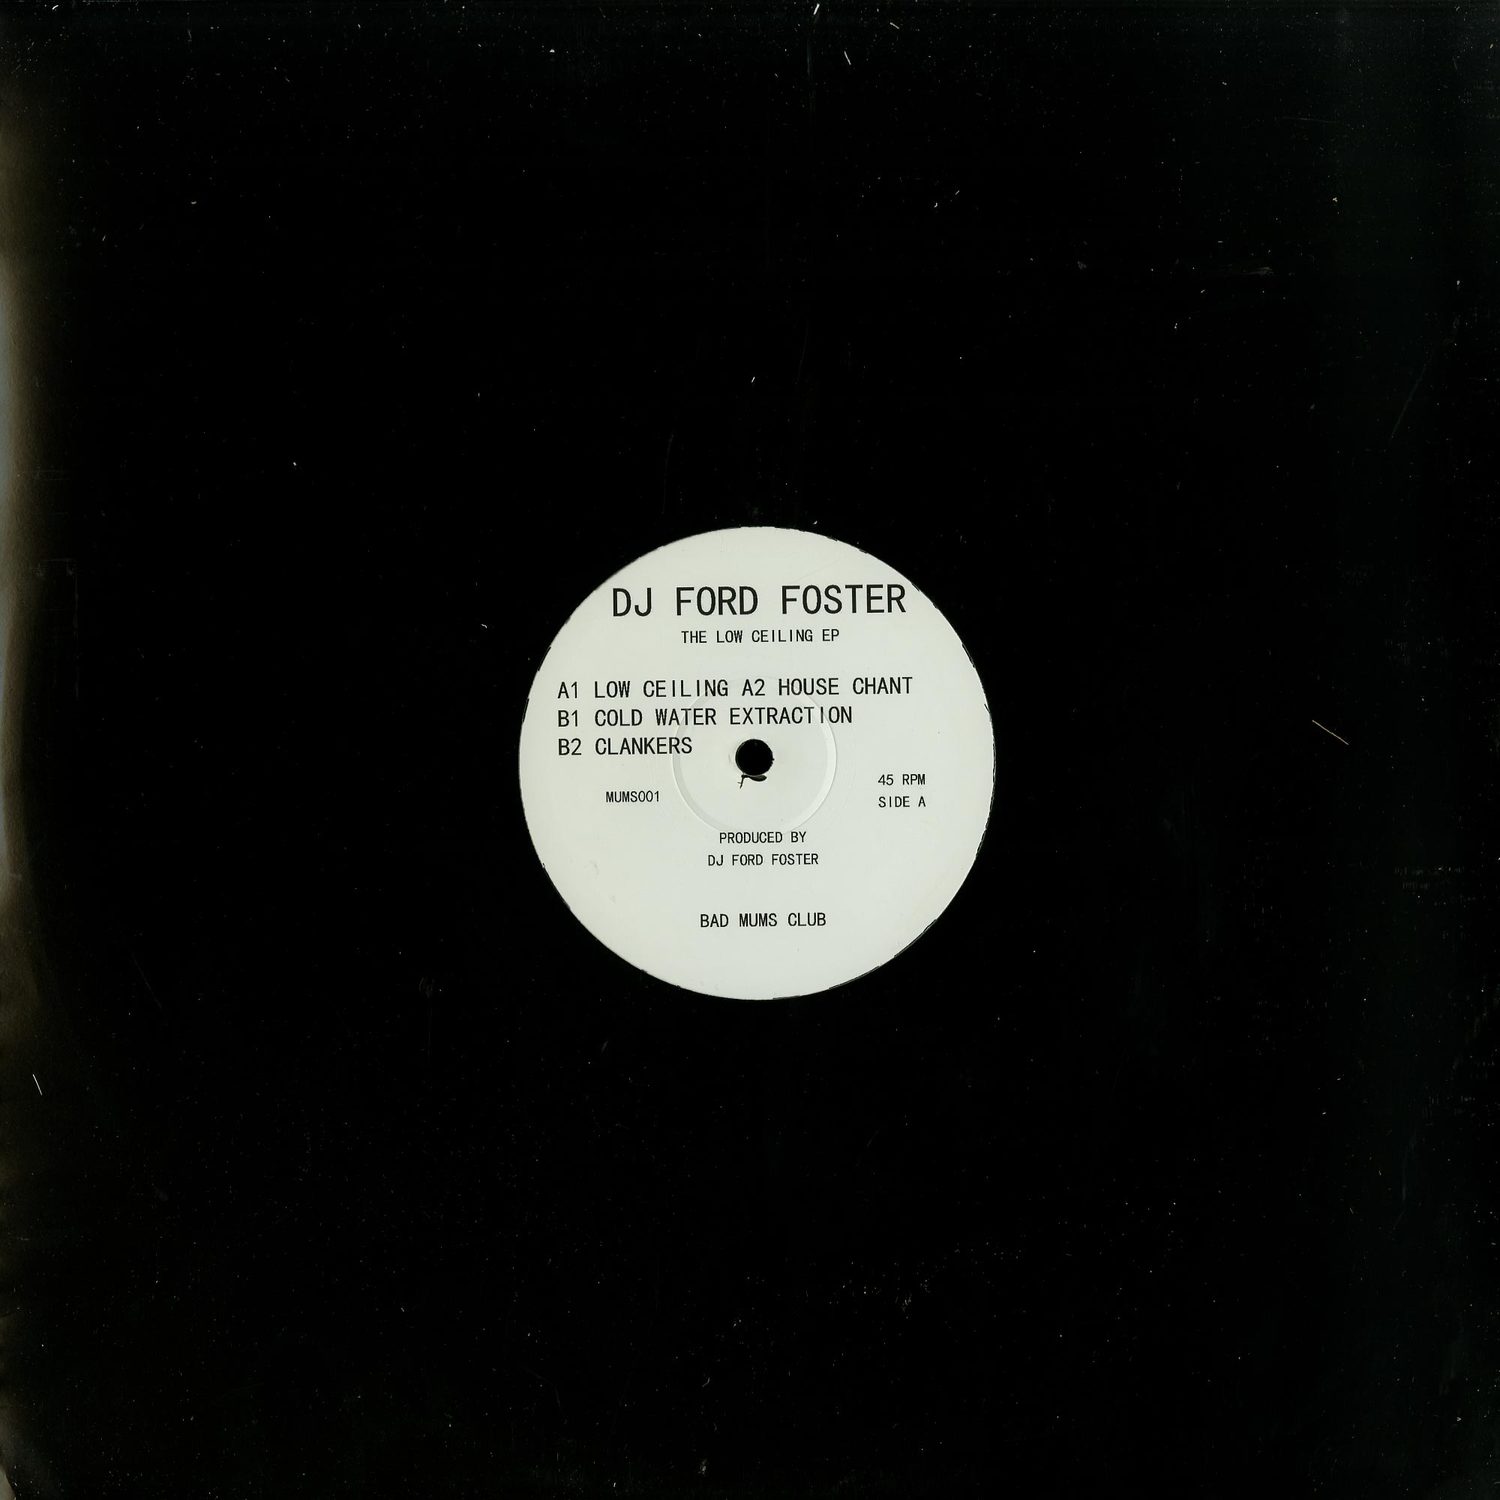 DJ Ford Foster - THE LOW CEILING EP